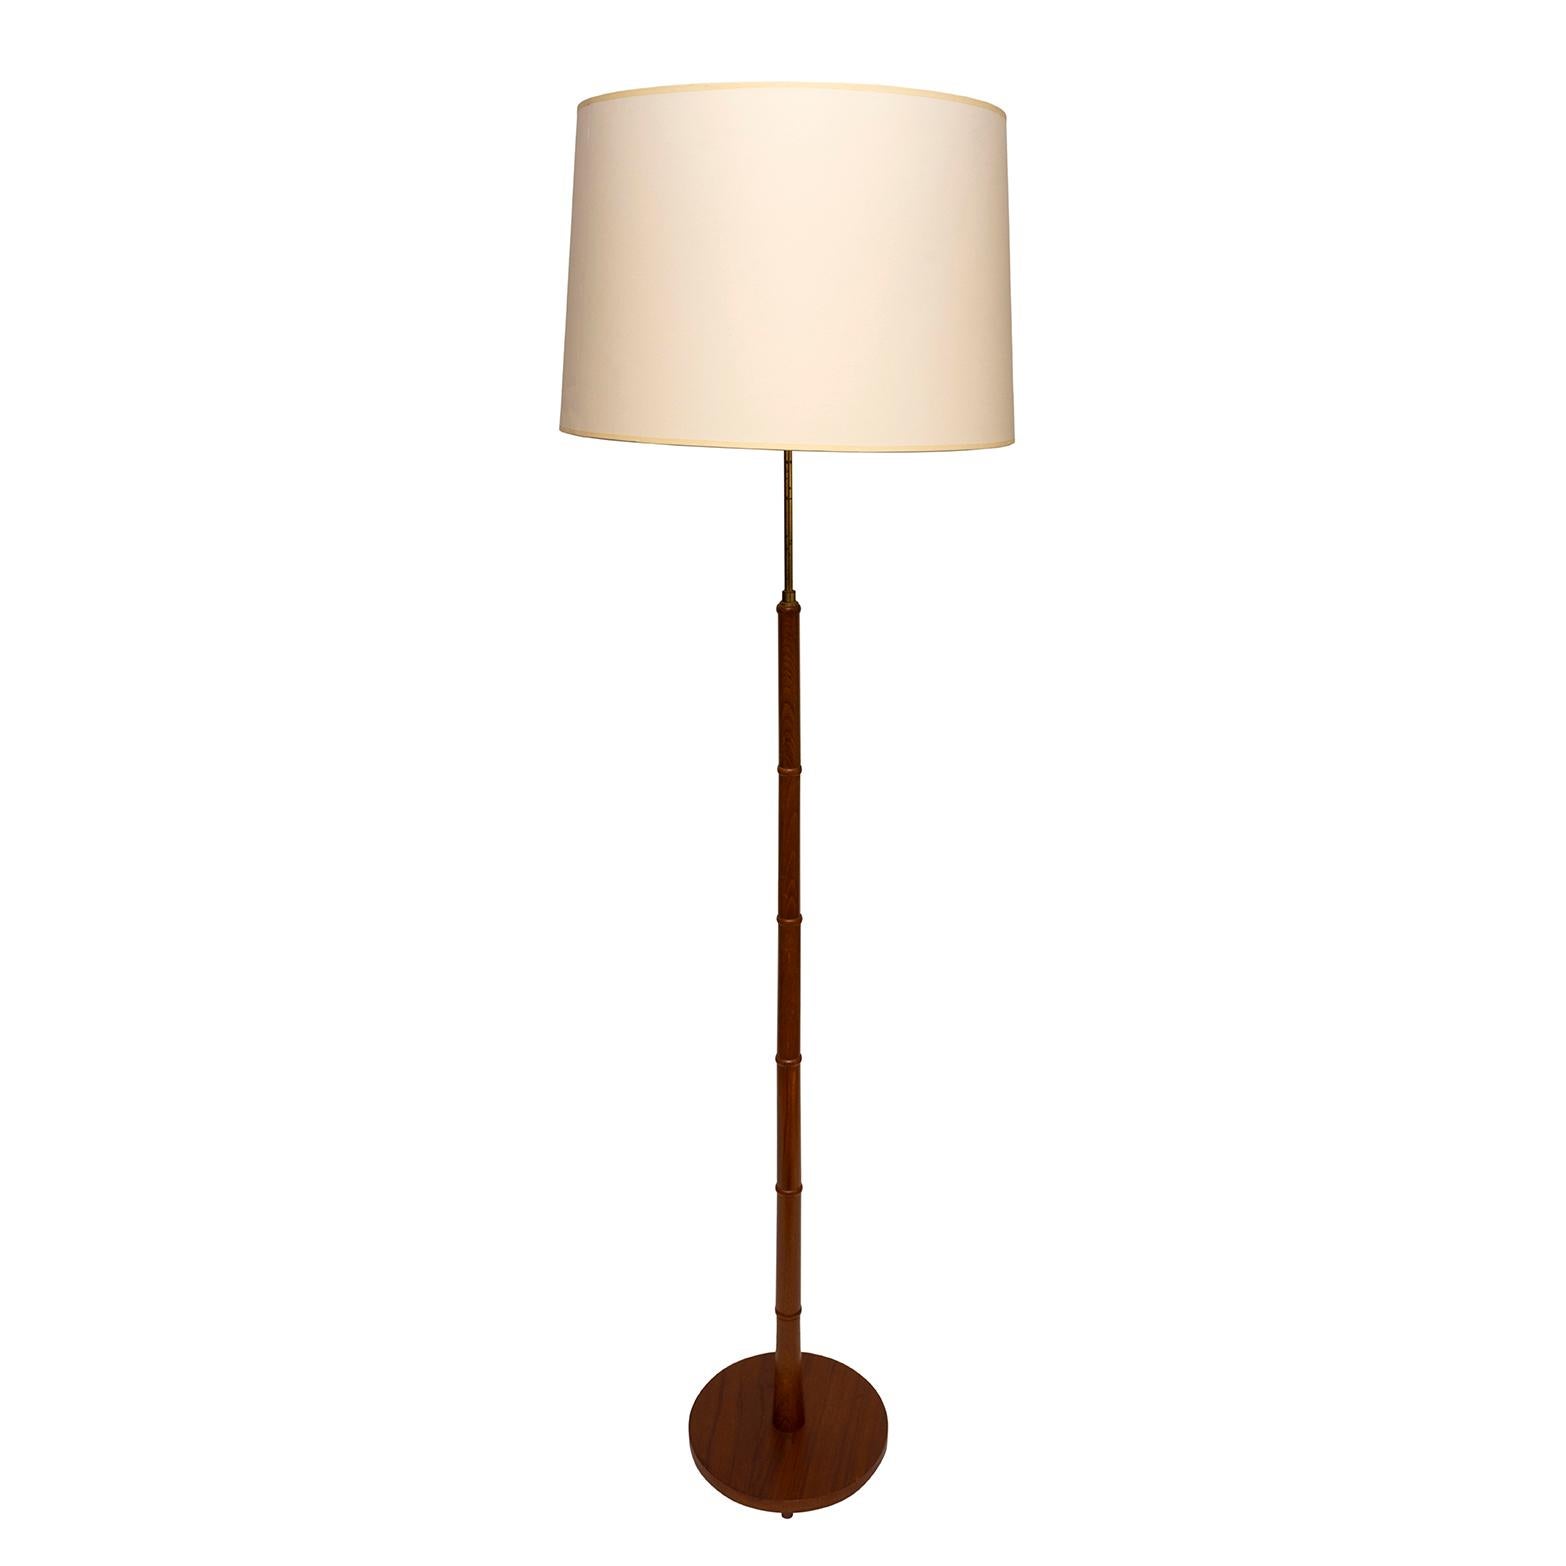 A FINE, MID-CENTURY MODERN, FRENCH, BROWN SUEDE & BRASS, FLOOR STANDING LAMP WITH ORIGINAL PARCHMENT & SUEDE SHADE, 161 cm., 5ft 3 ½ “ high

Evokes the mid-century modern atmosphere. 
The fretwork patterning at the bottom of the shade softens and